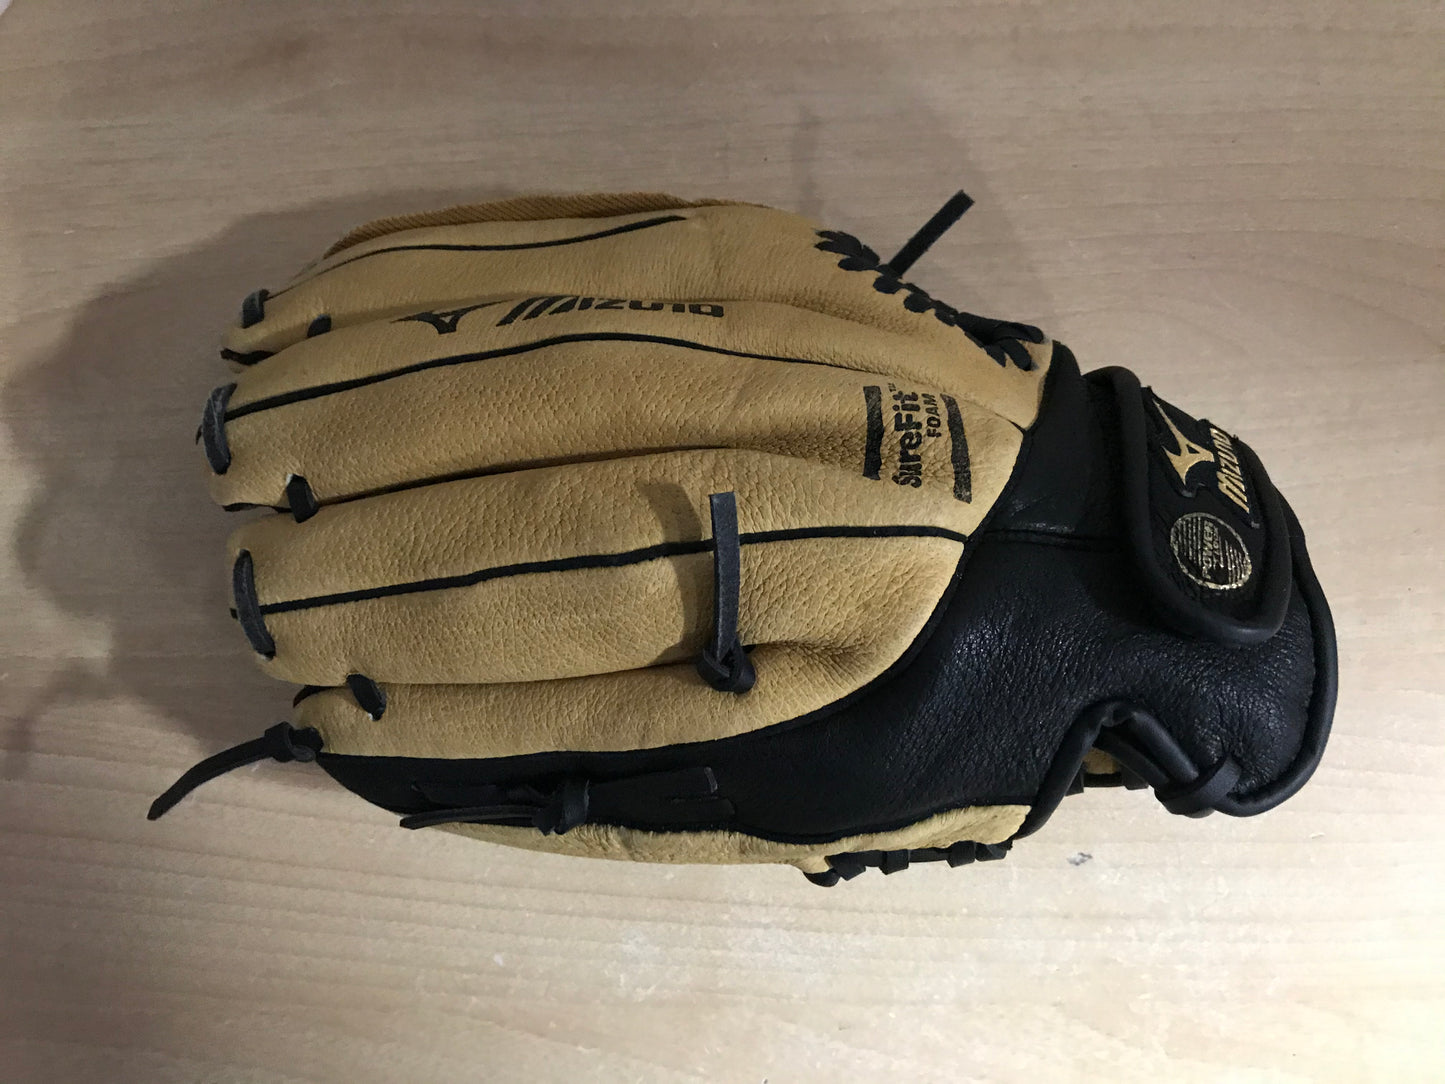 Baseball Glove Adult Size 11.5 inch Mizuno Max Flex Black Brown Soft Leather Fits on LEFT Hand As New